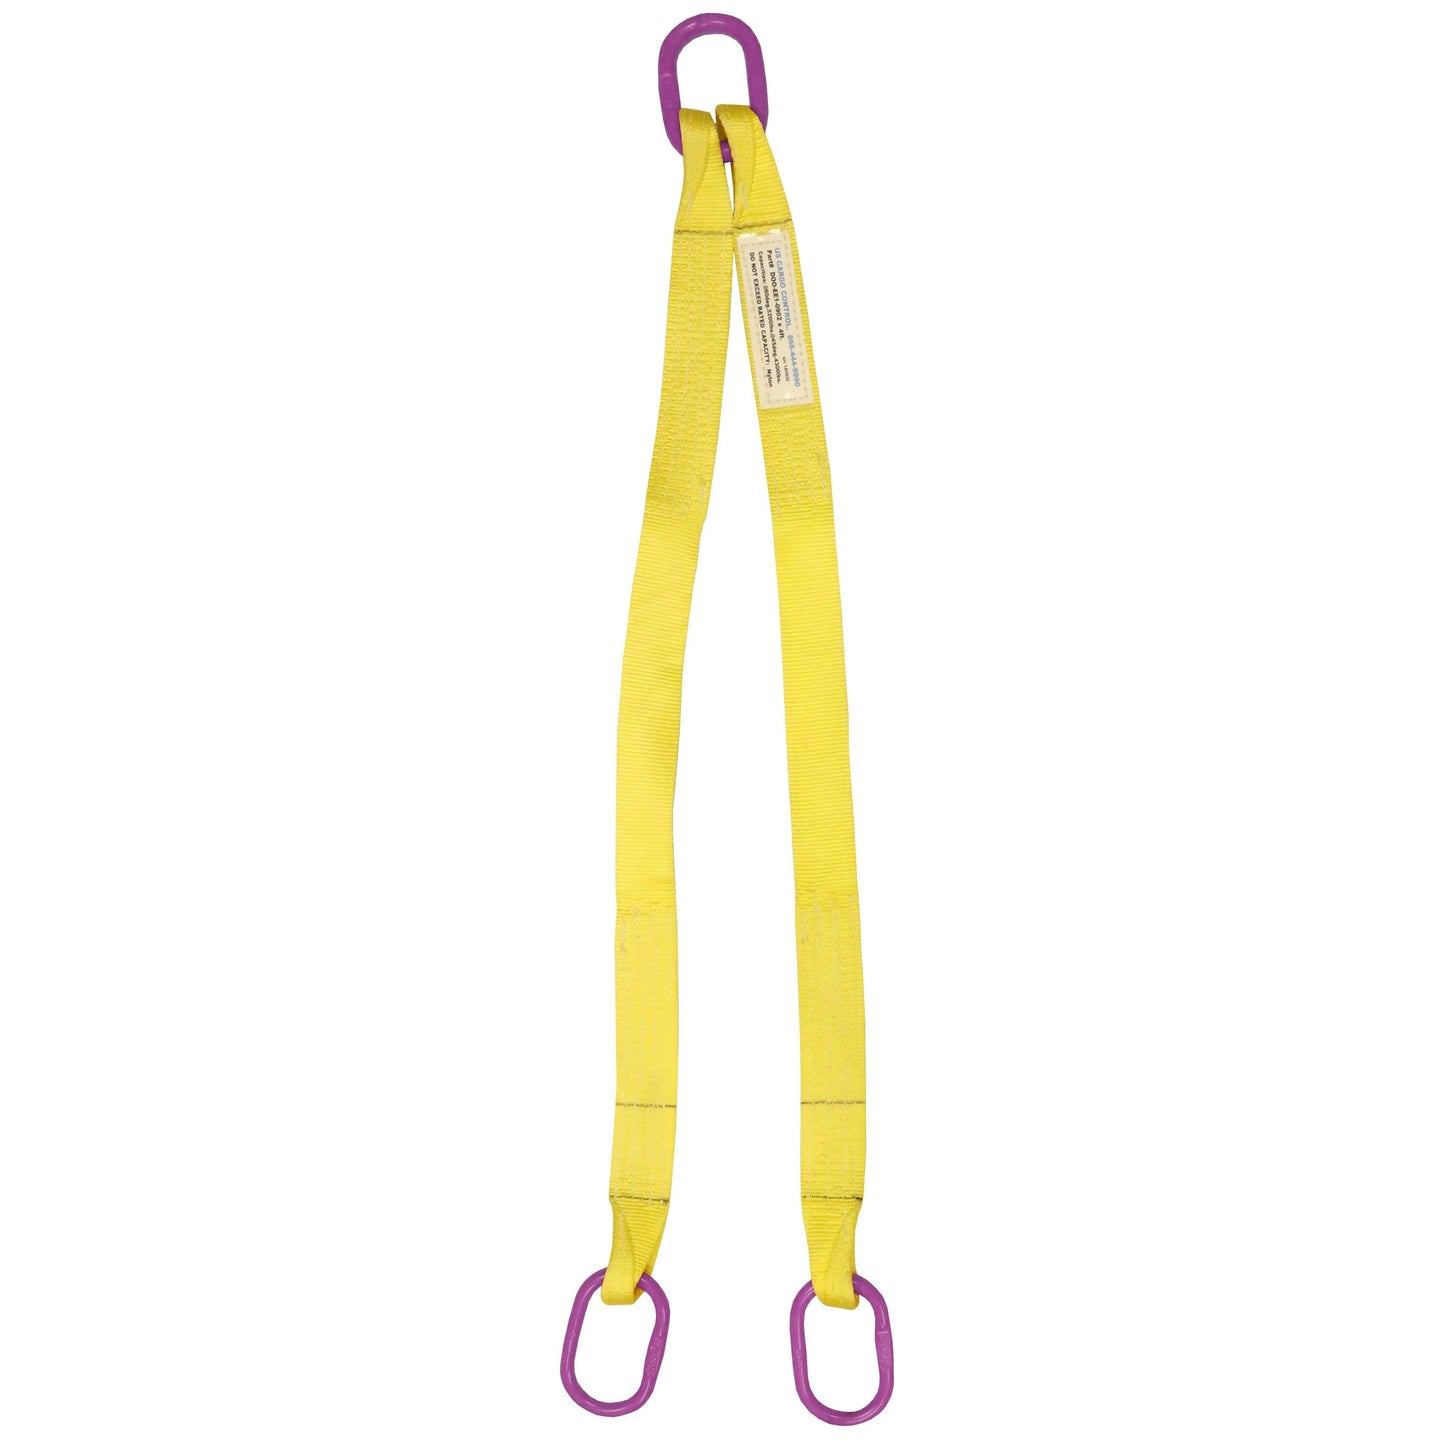 2 inchx7 foot (2 ply) Double Leg Nylon Sling w Master Link Both Ends image